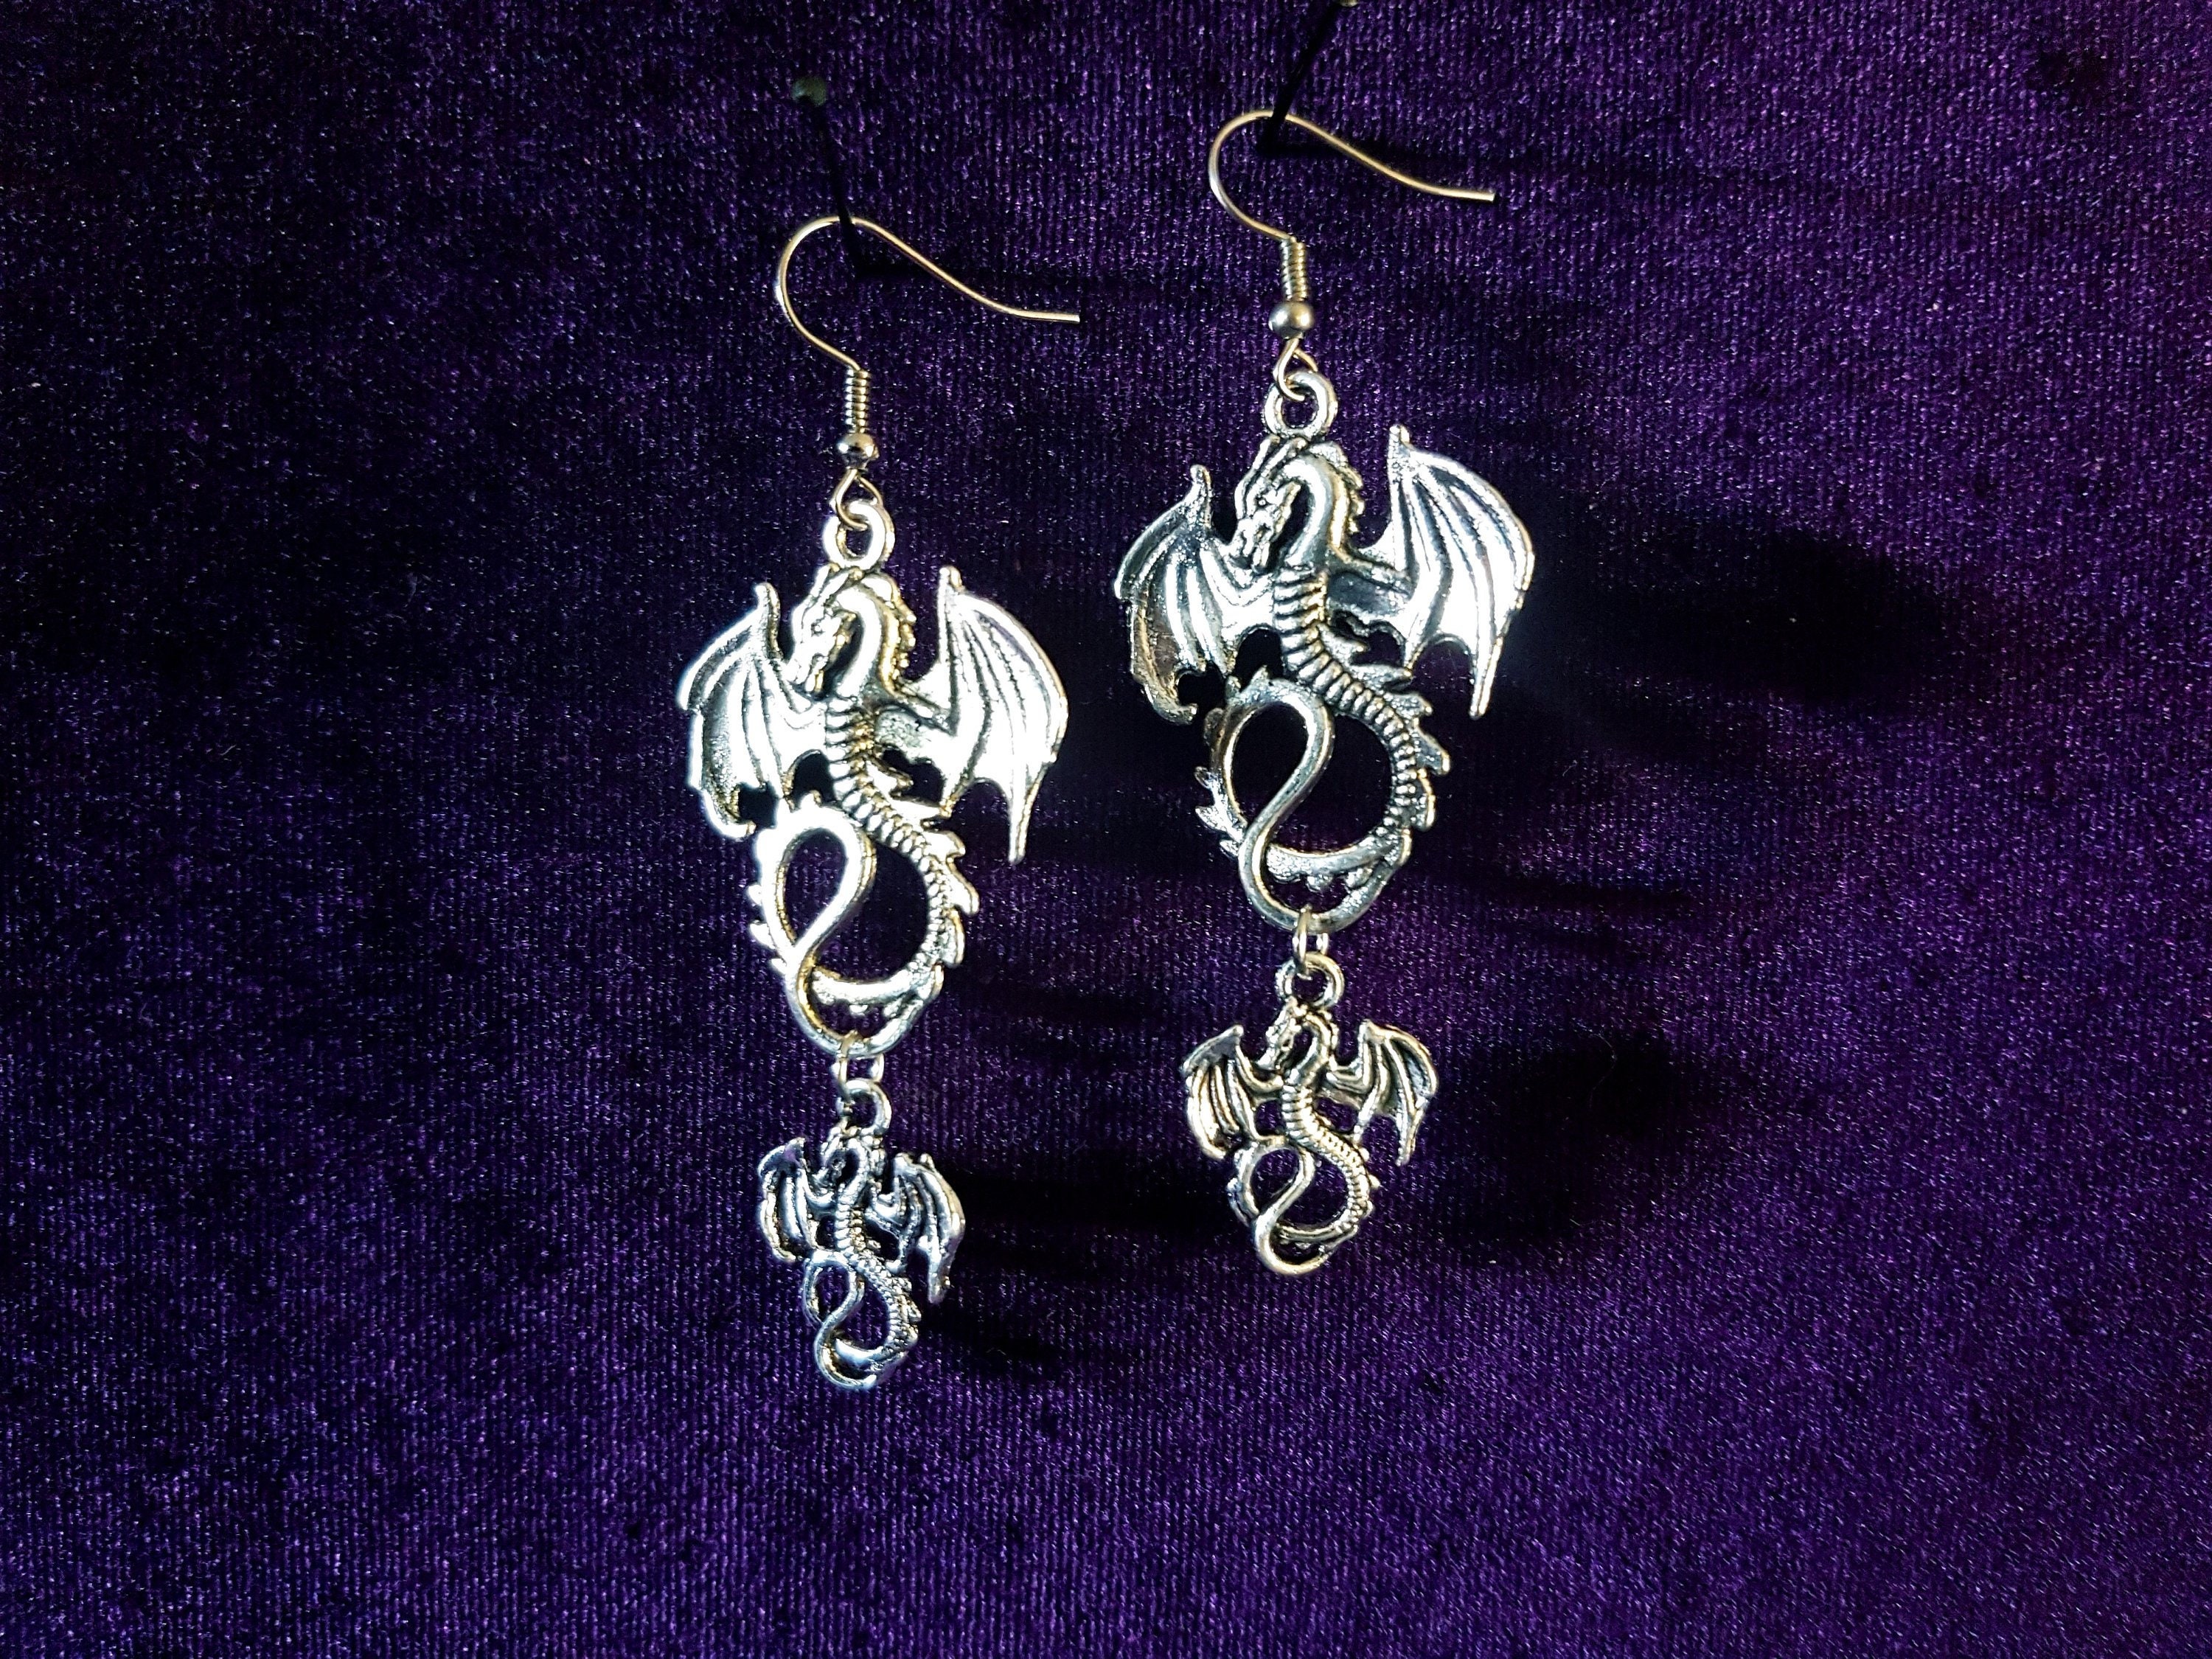 Mother of Dragons Earrings